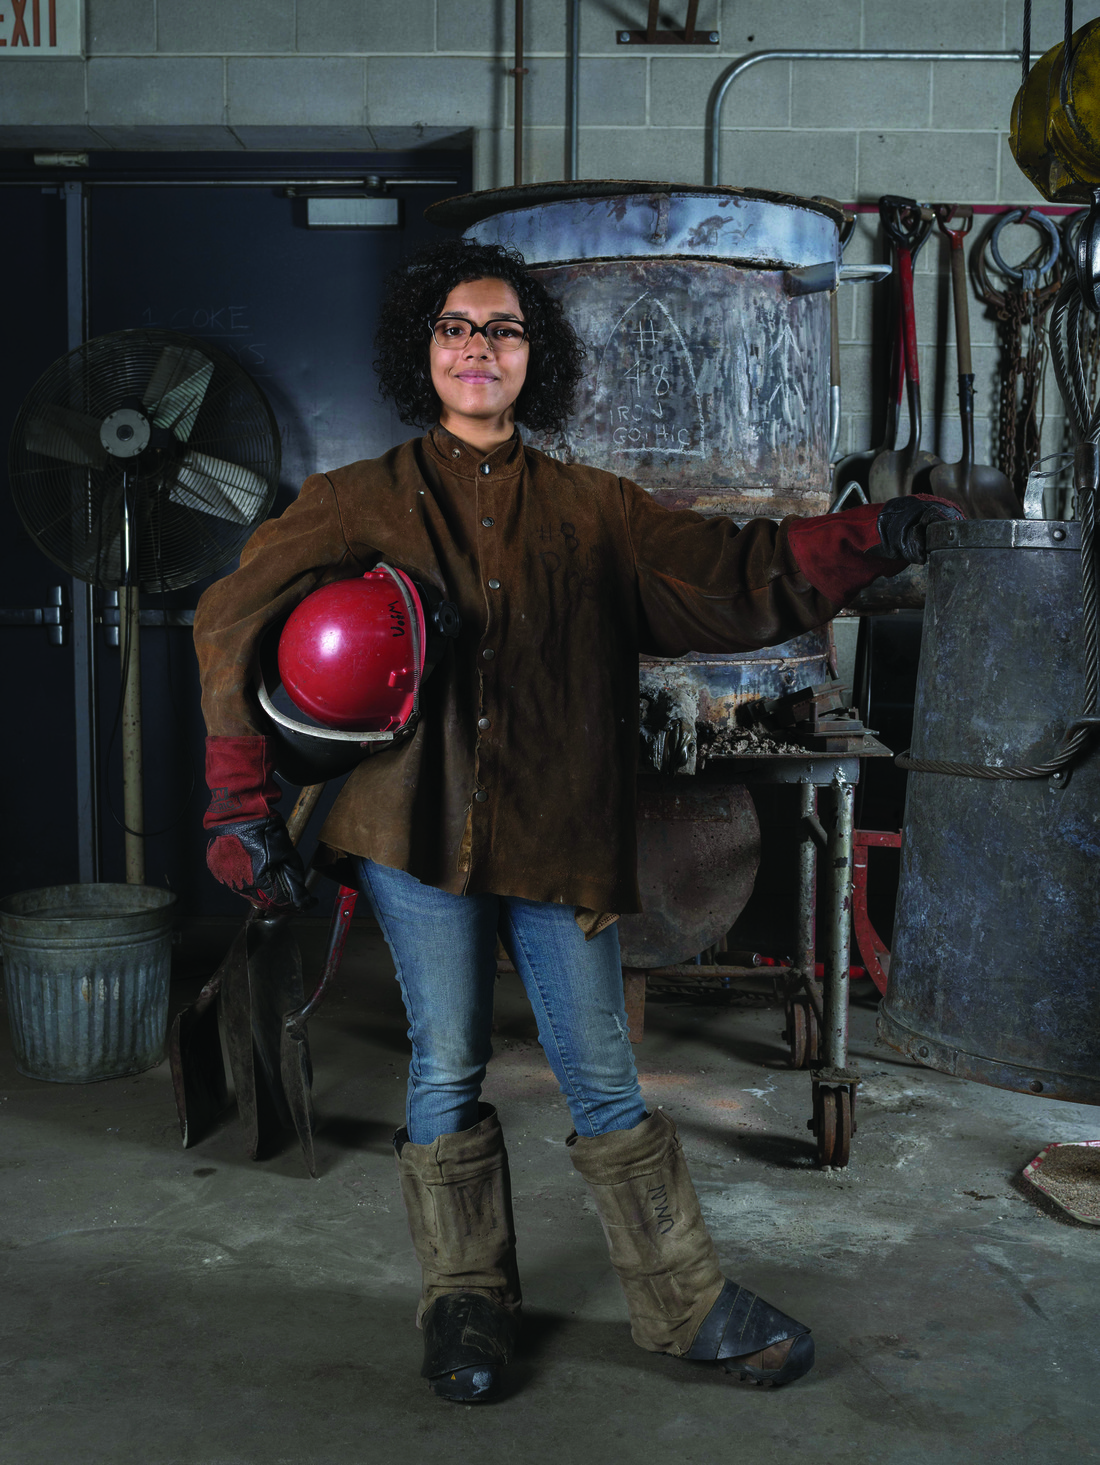 Woman in foundary wearing heavy boots and jacket, carrying a welding mask